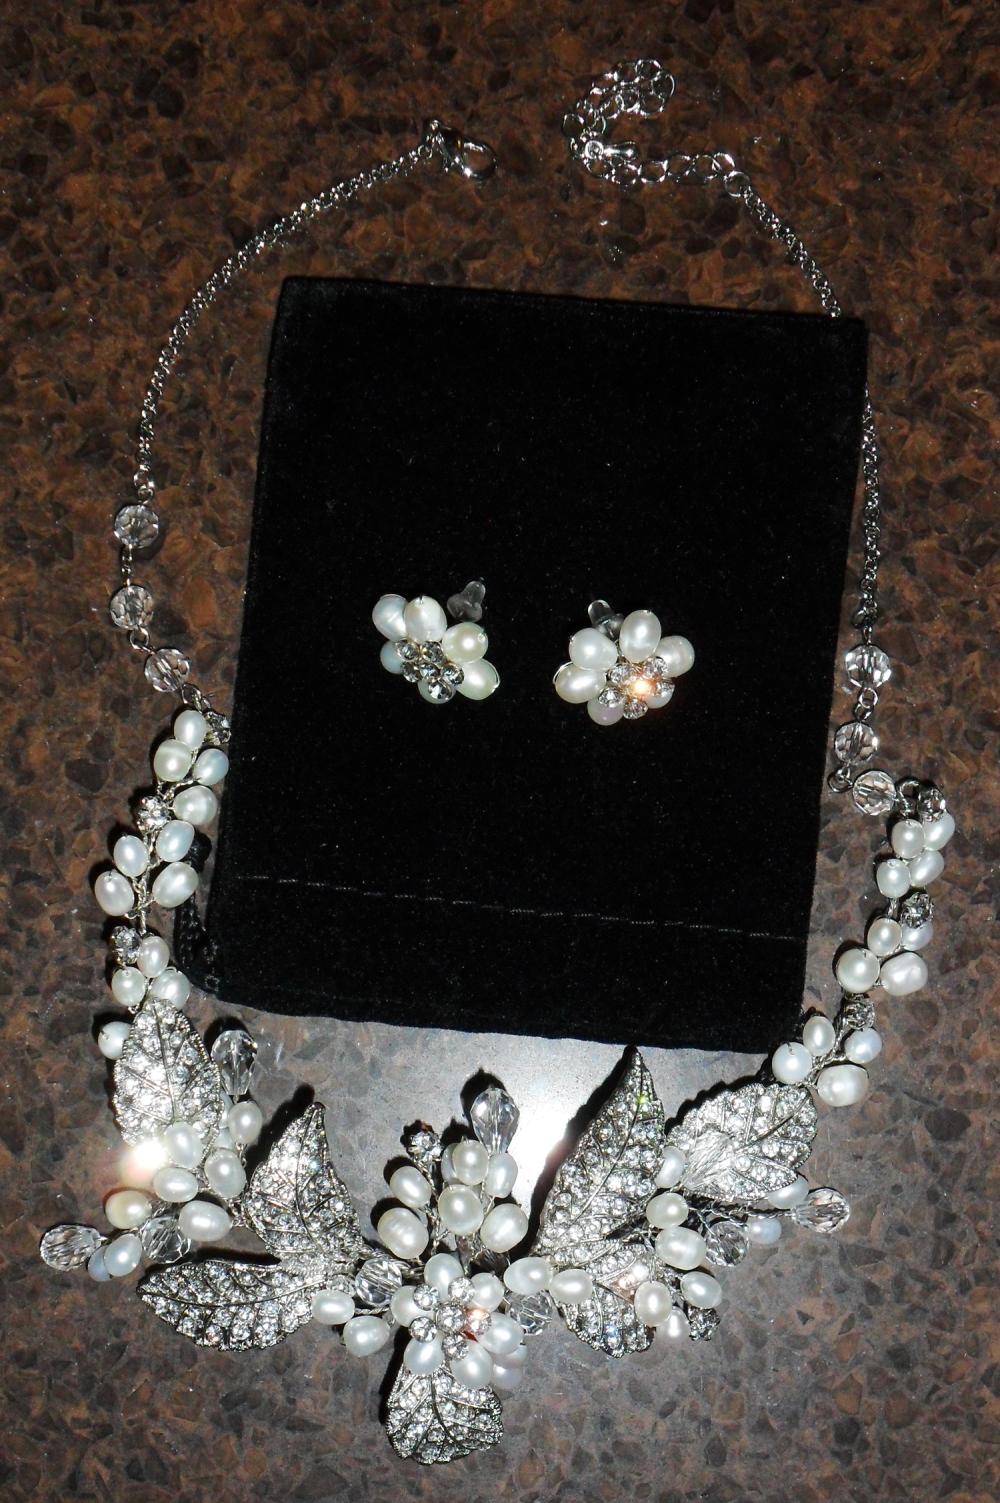 Vintage rhinestone and pearl necklace and earring set